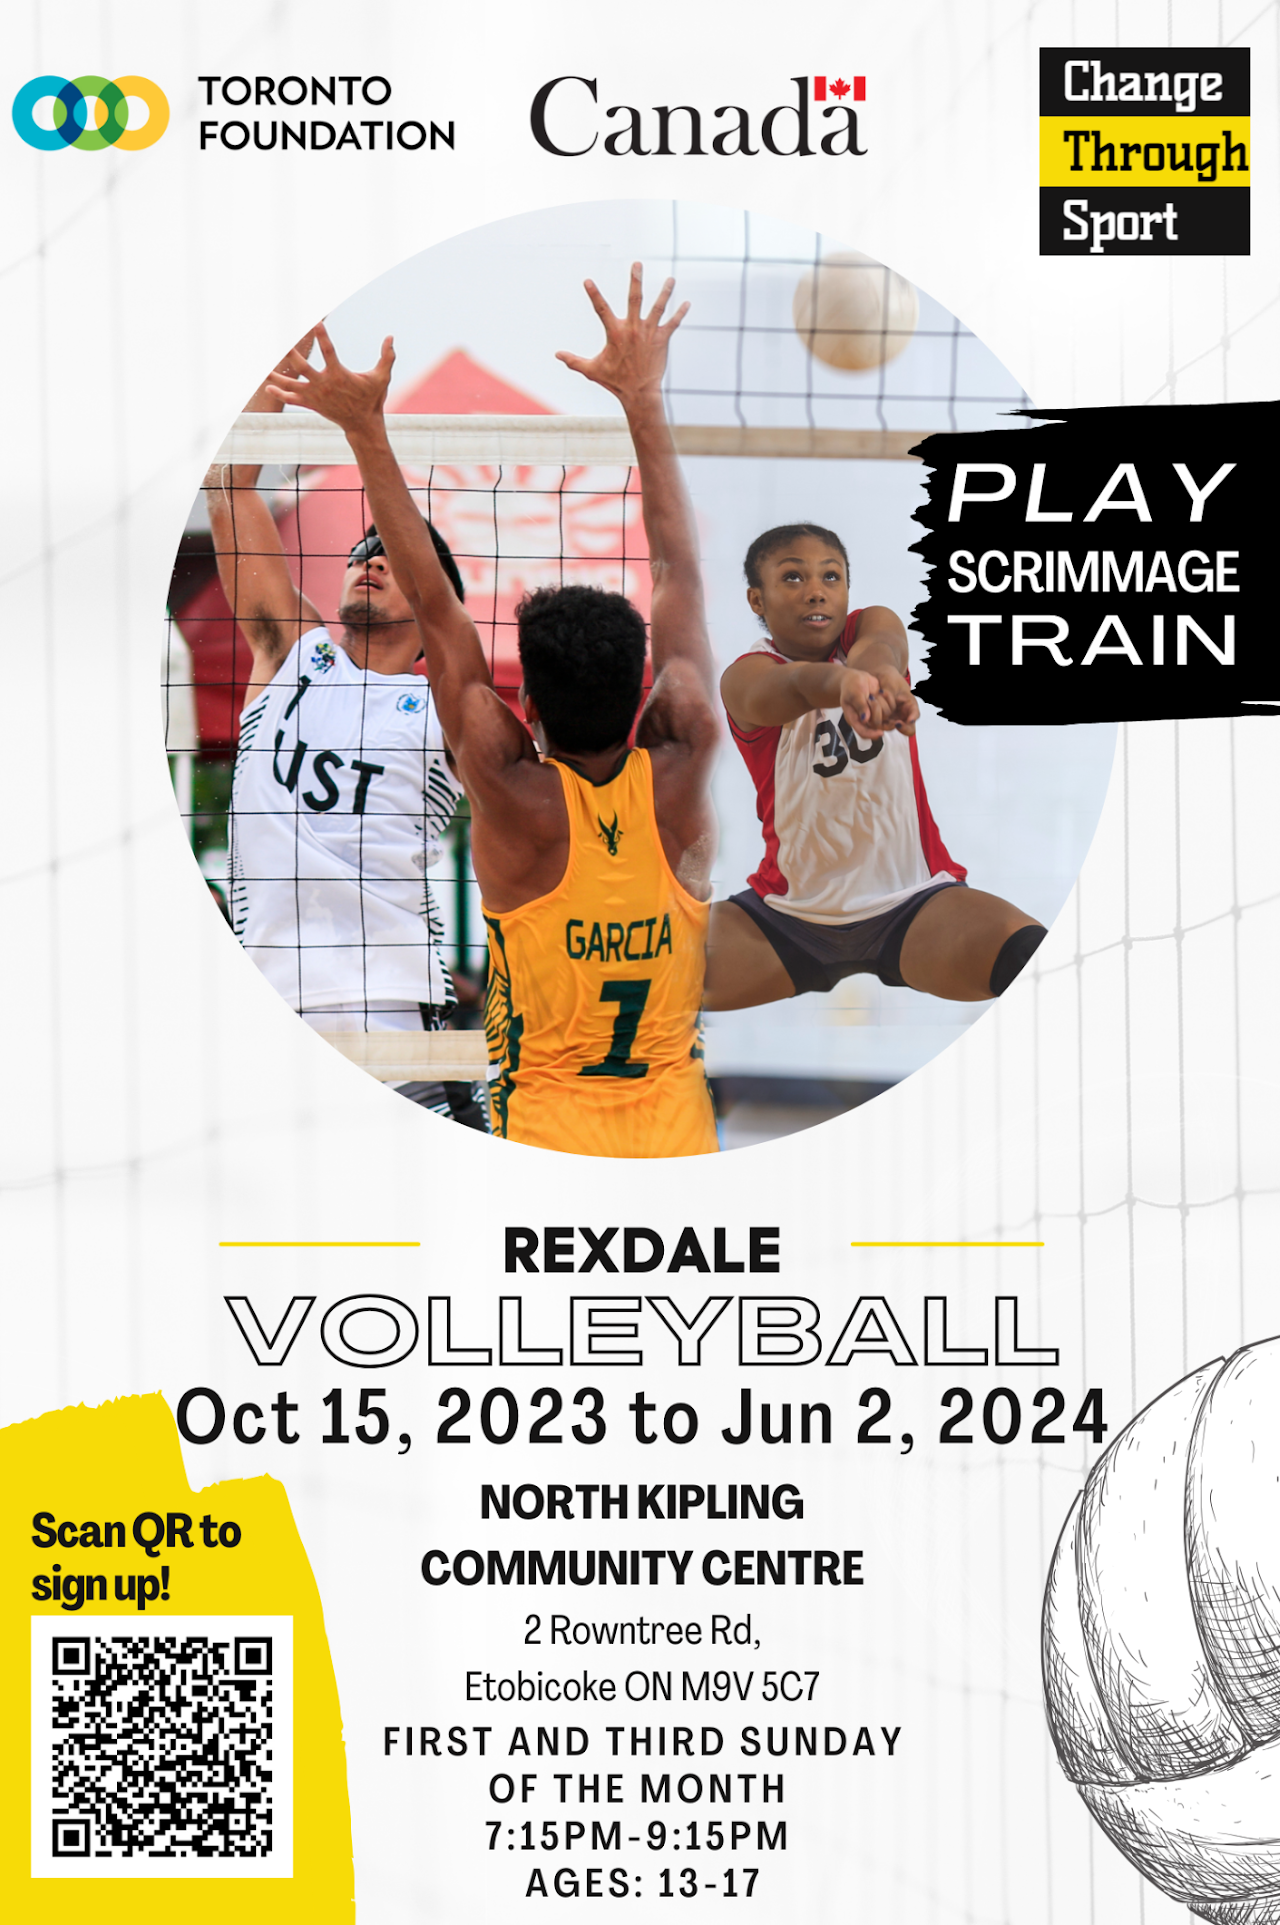 Rexdale Volleyball - Poster